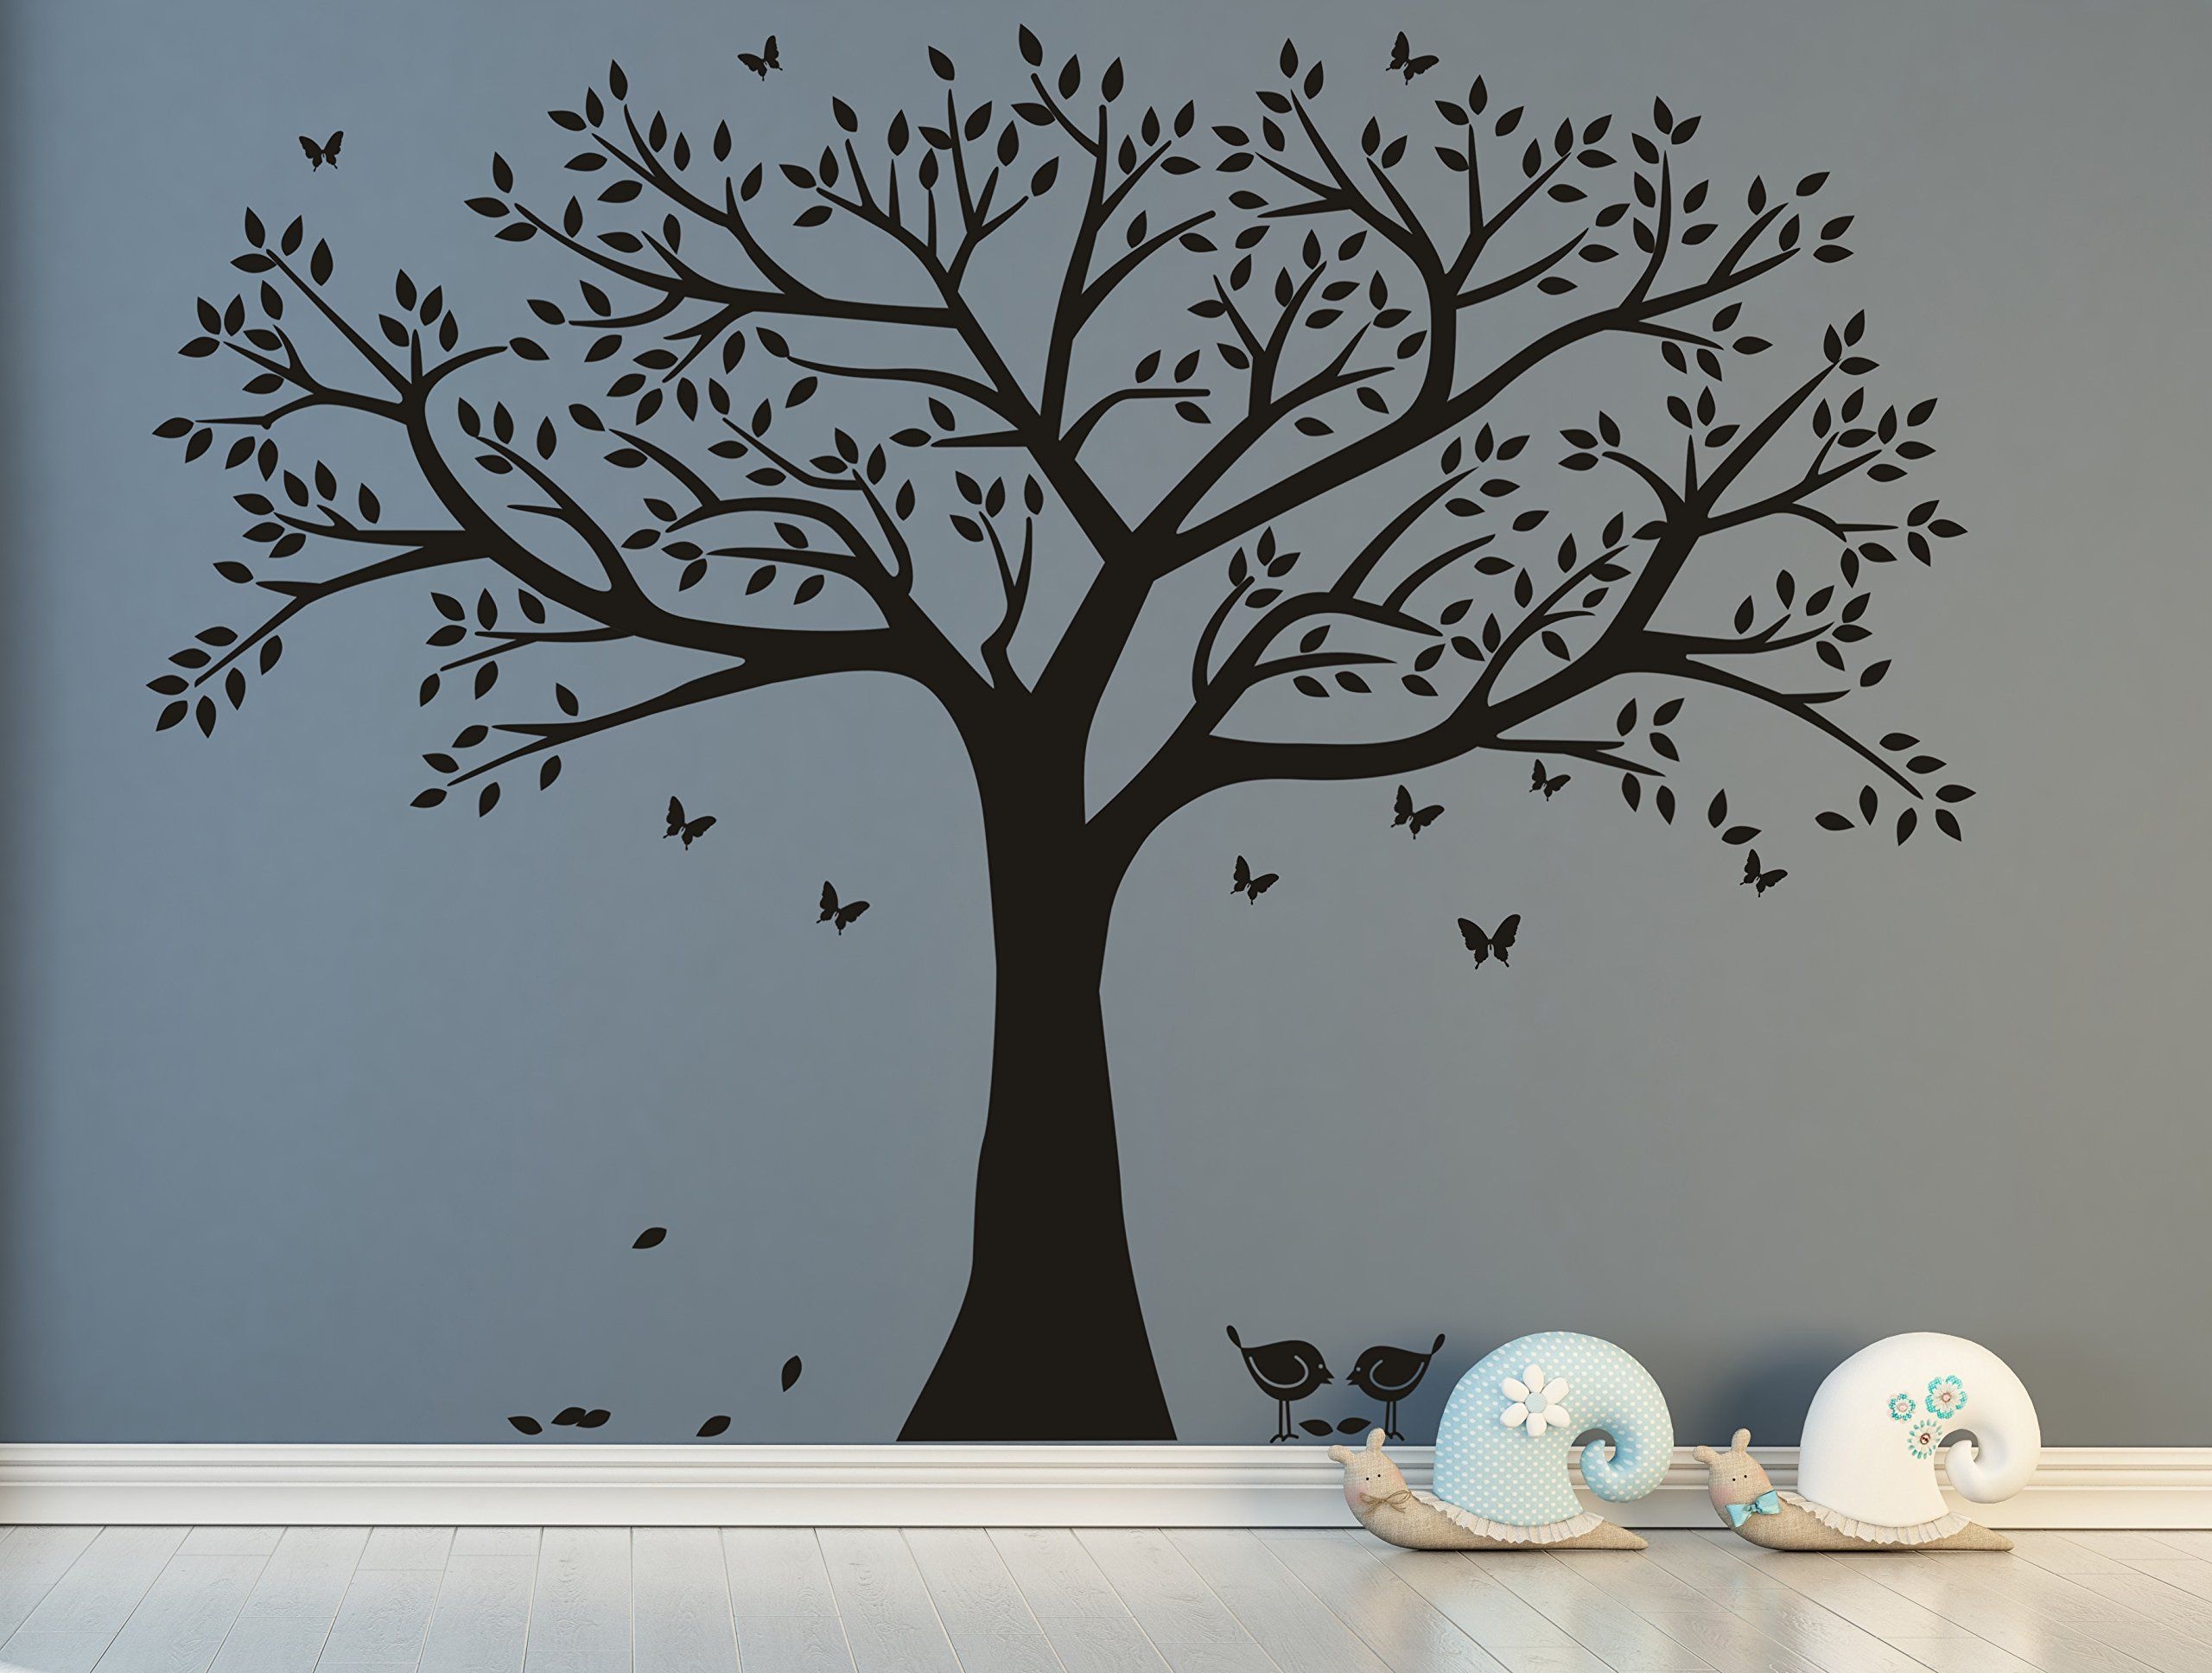 Family Tree Birds Photo Frame Tree Wall Stickers Kids Wall Decals Stickers-.P145 